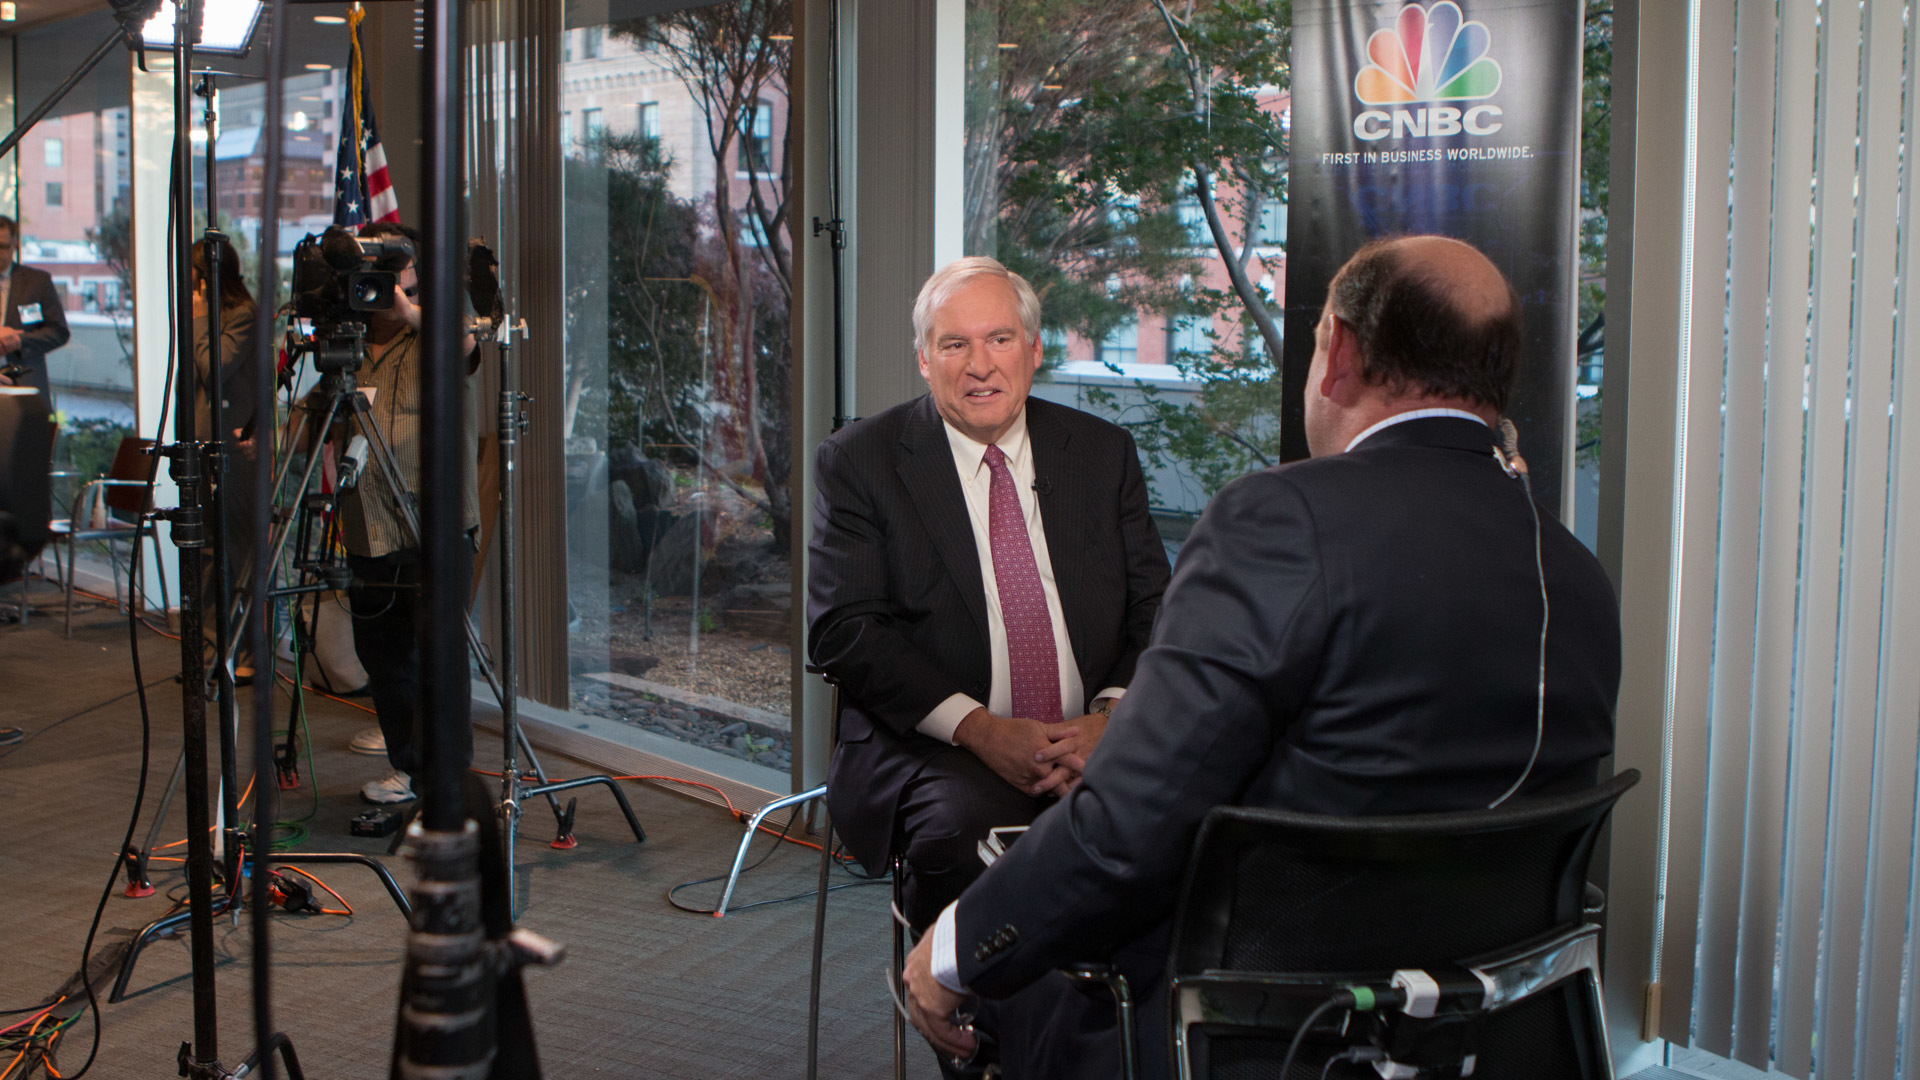 Image of Eric S. Rosengren being interviewed by CNBC at the Boston Federal Reserve Bank of Boston.